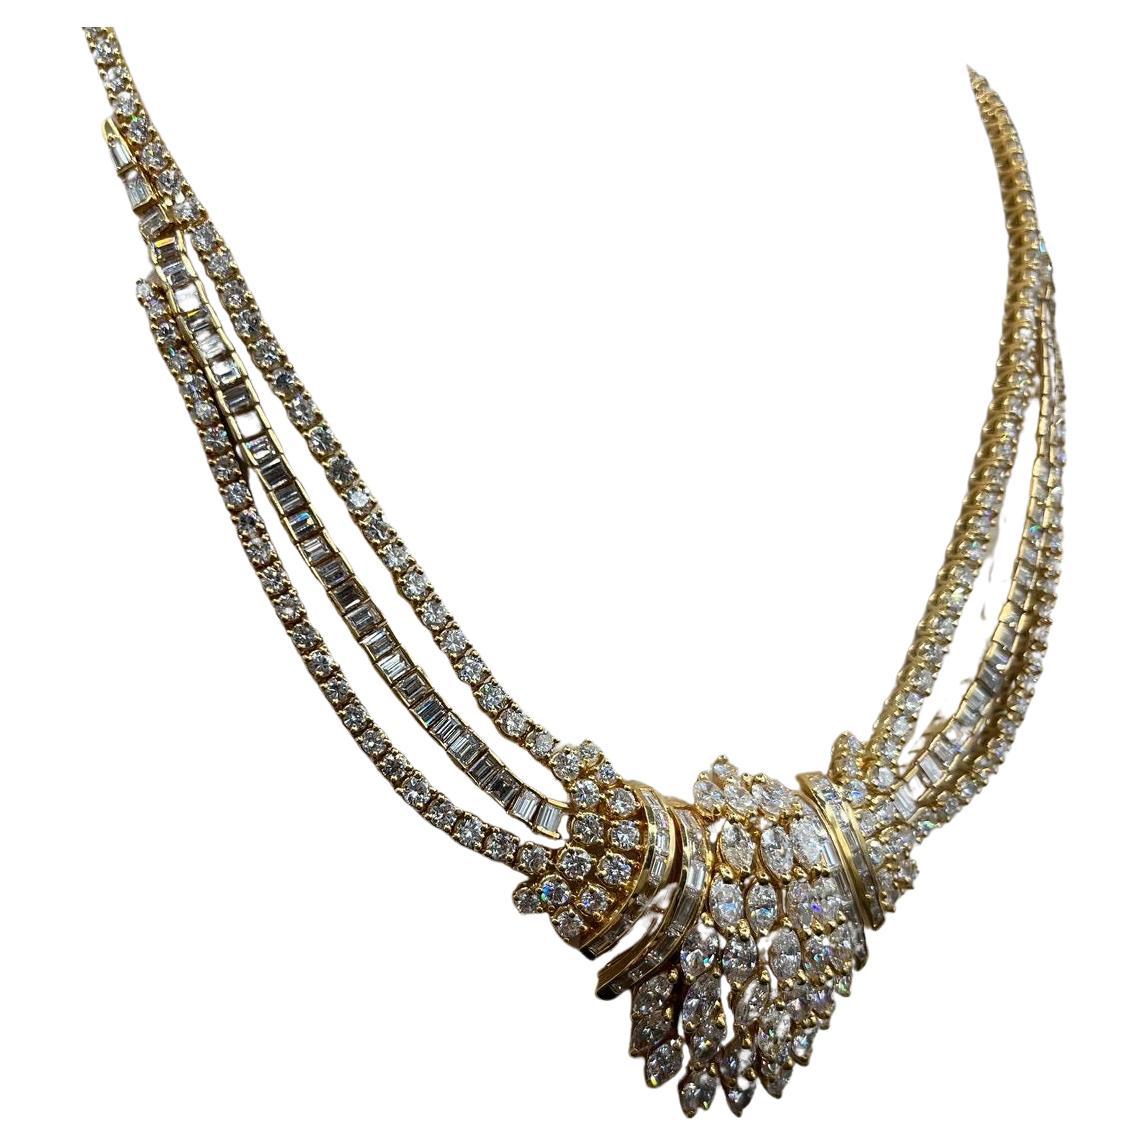  an opulent 18K Cocktail Diamonds Necklace, meticulously crafted to exude elegance and luxury. This breathtaking necklace boasts a total of 194 round-cut diamonds, totaling an impressive 16 carats. Additionally, it features 35 marquise-cut diamonds